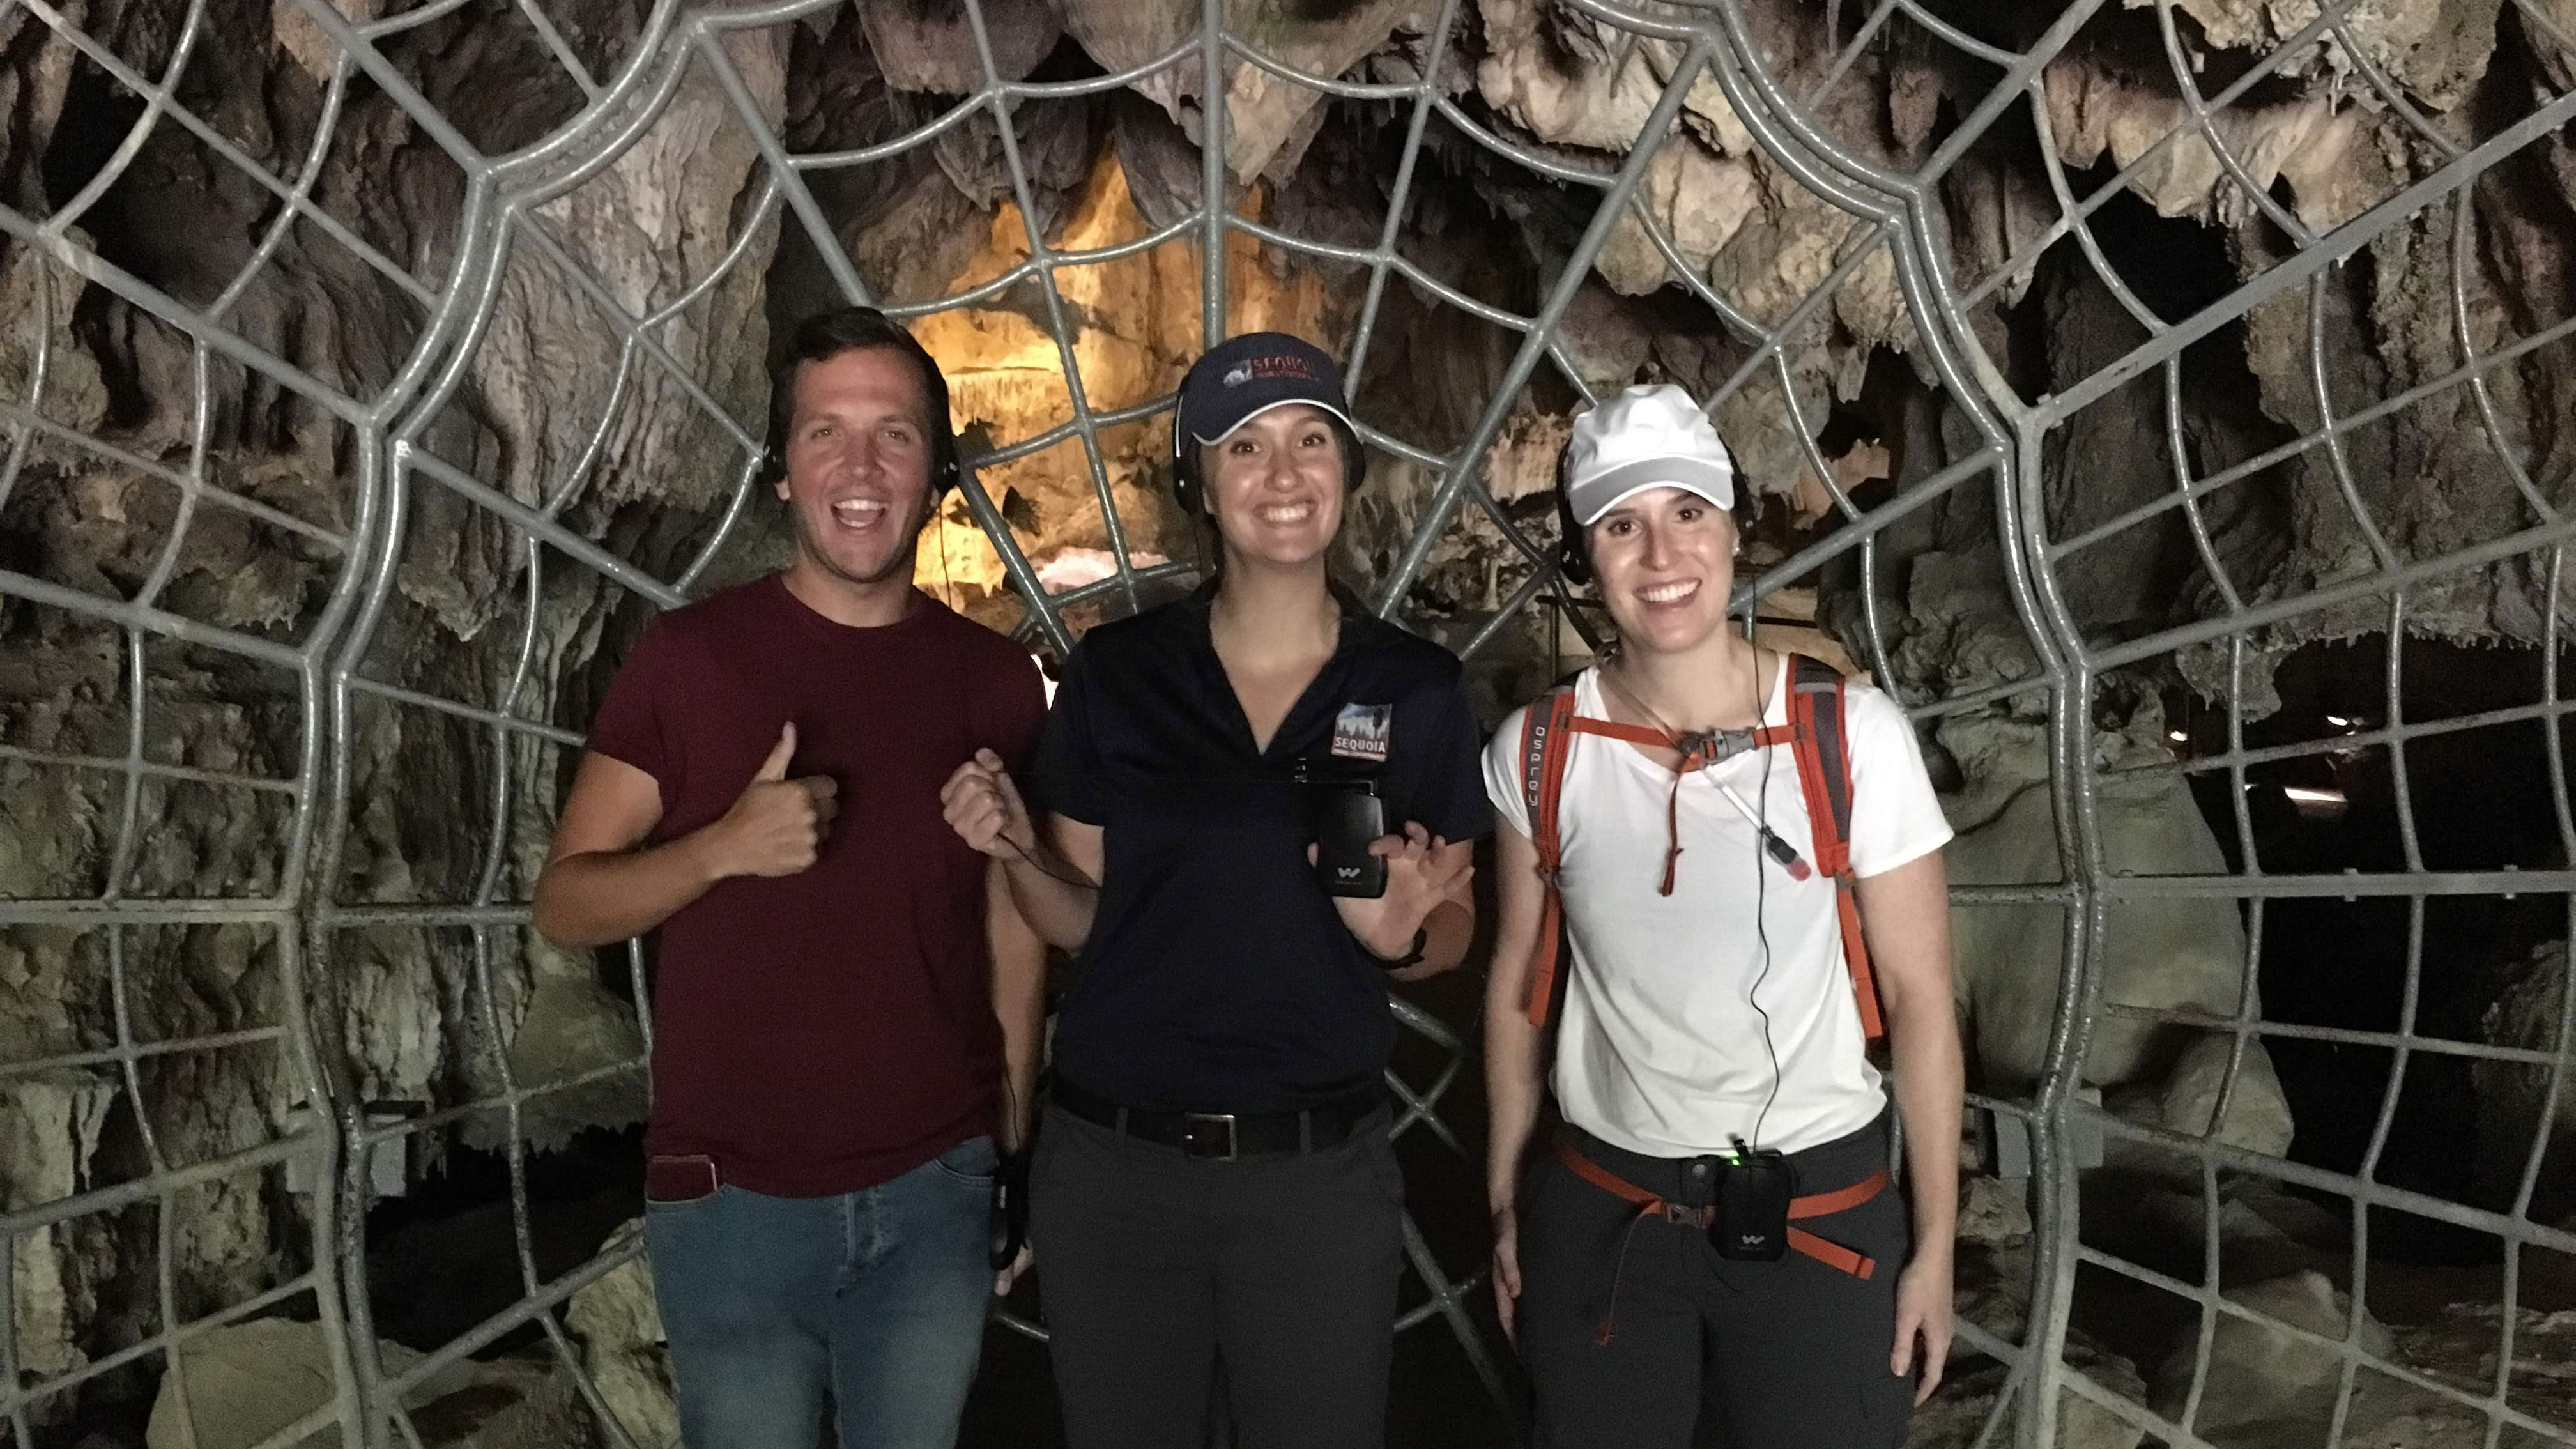 Testing out equipment for the deaf and hard of hearing in Crystal Cave at Sequoia National Park